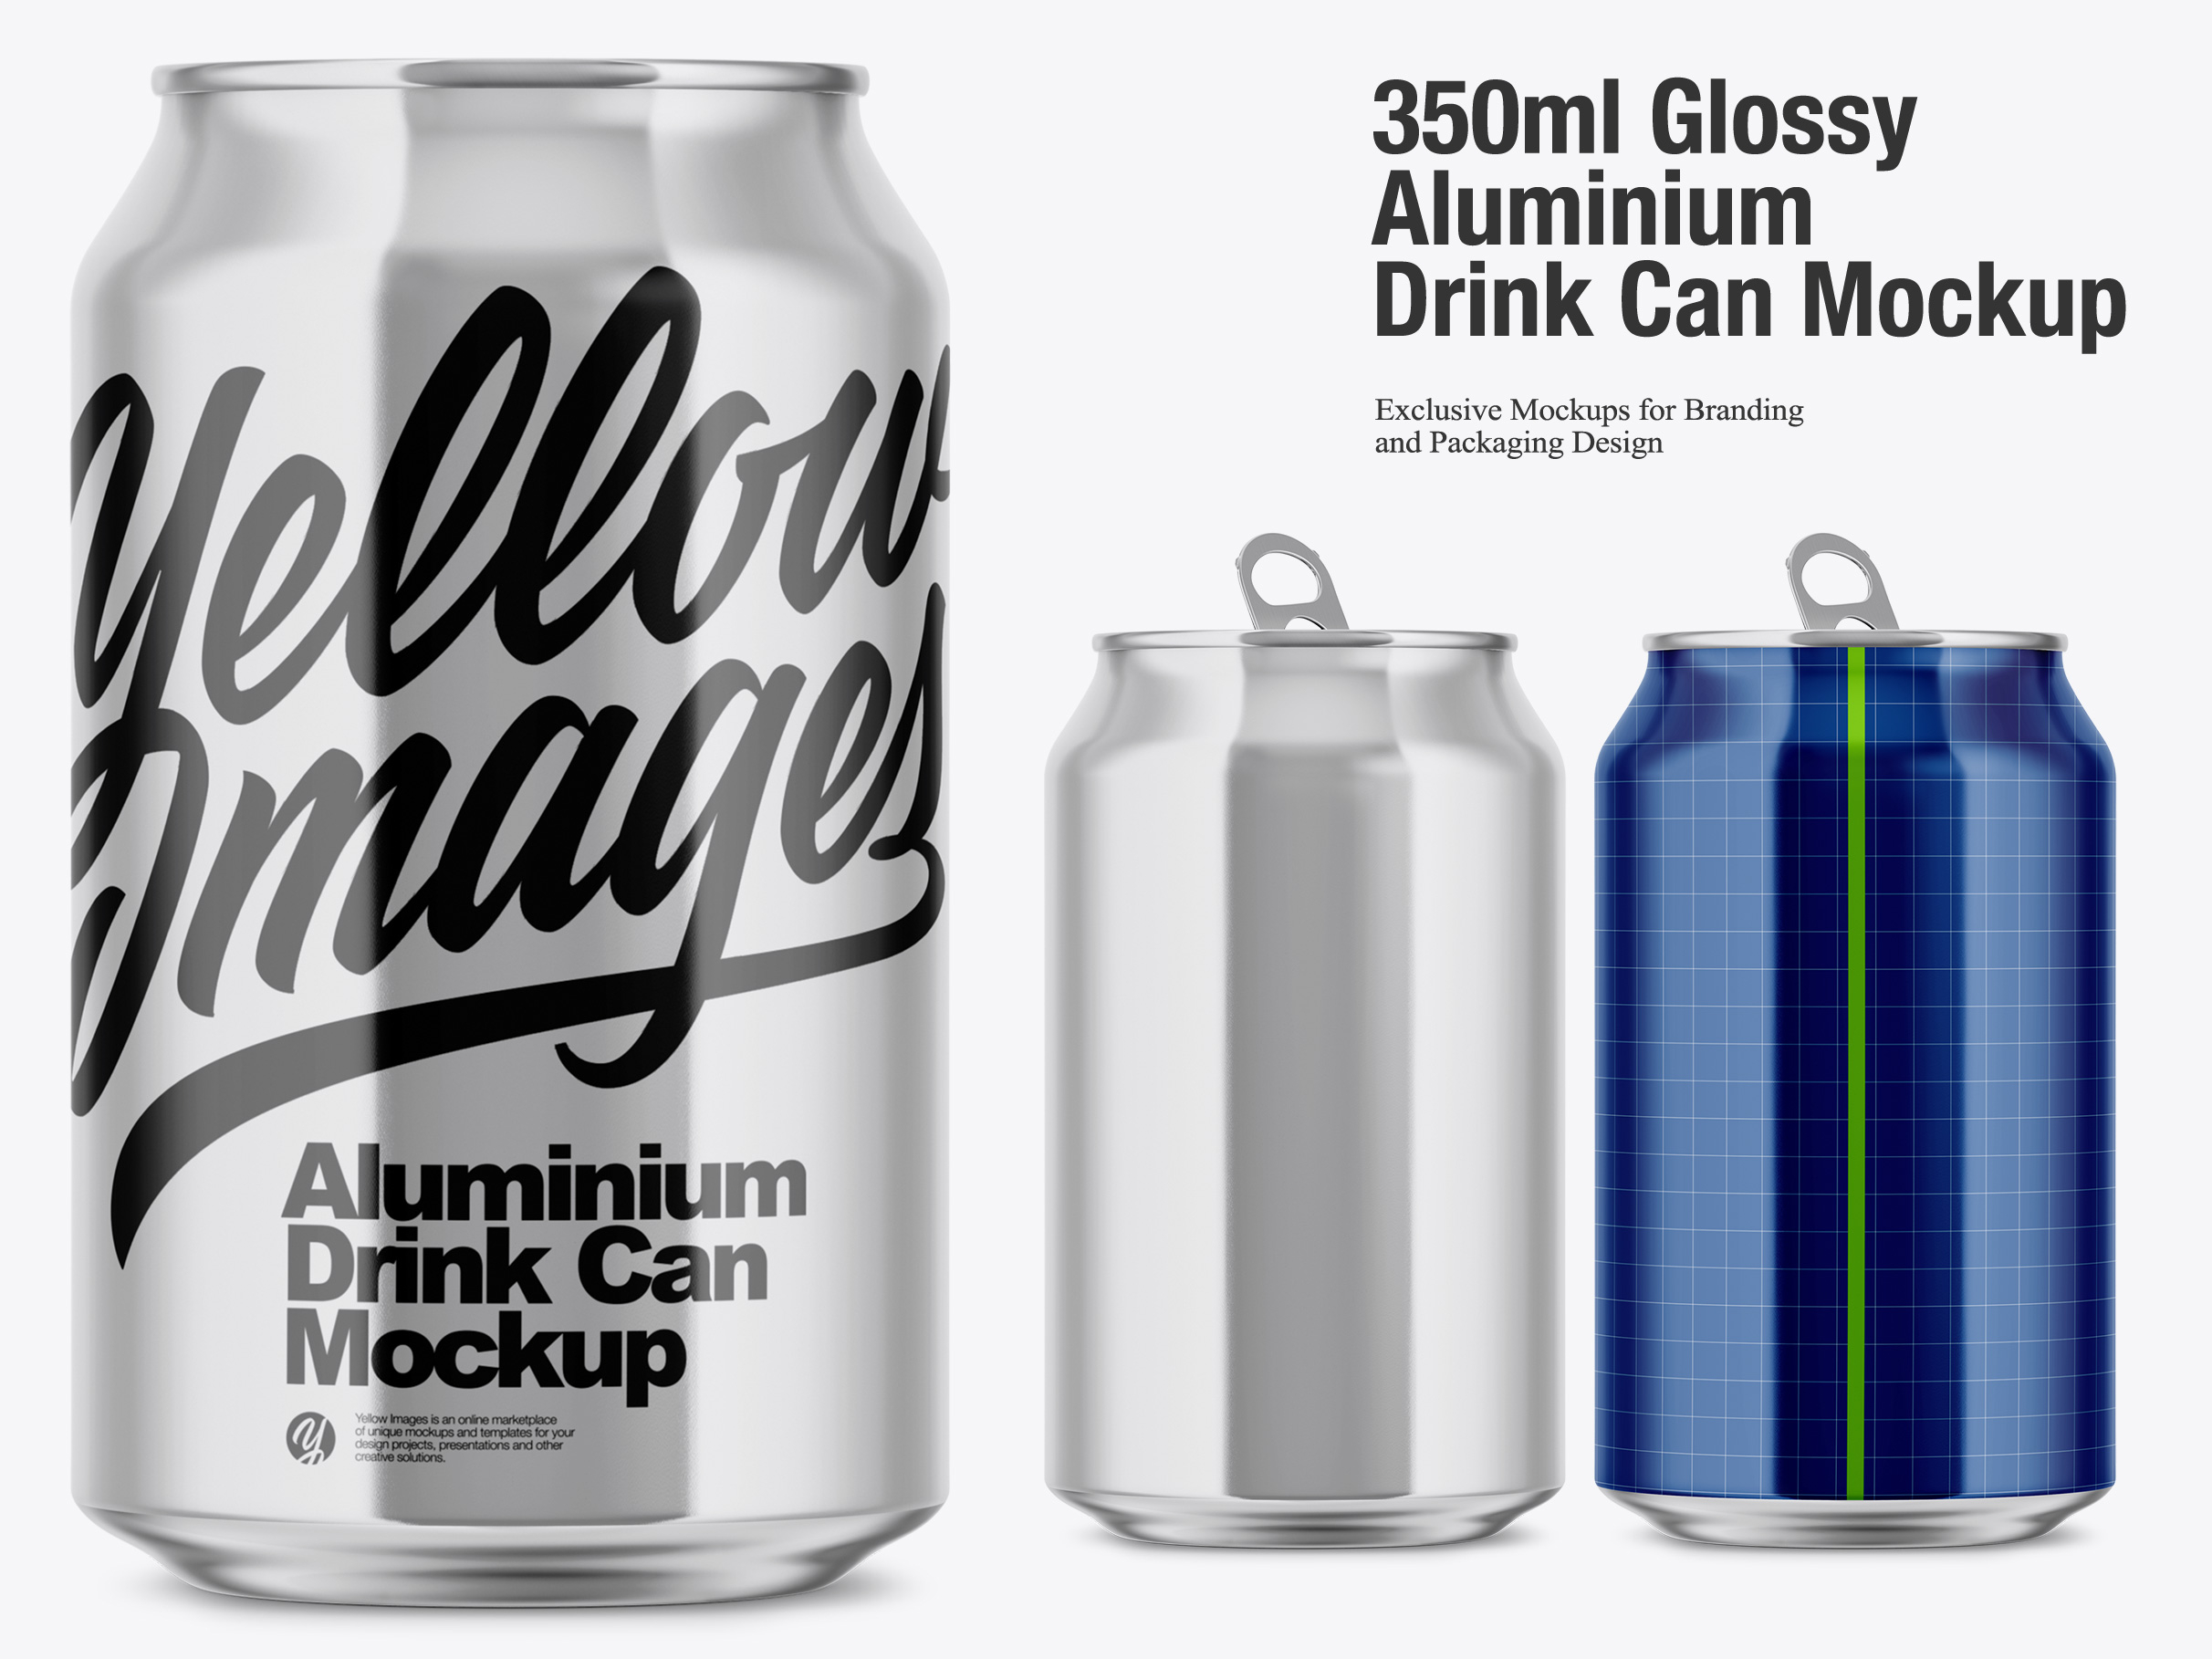 Download 350ml Glossy Aluminium Drink Can Mockup By Oleksandr Hlubokyi On Dribbble Yellowimages Mockups